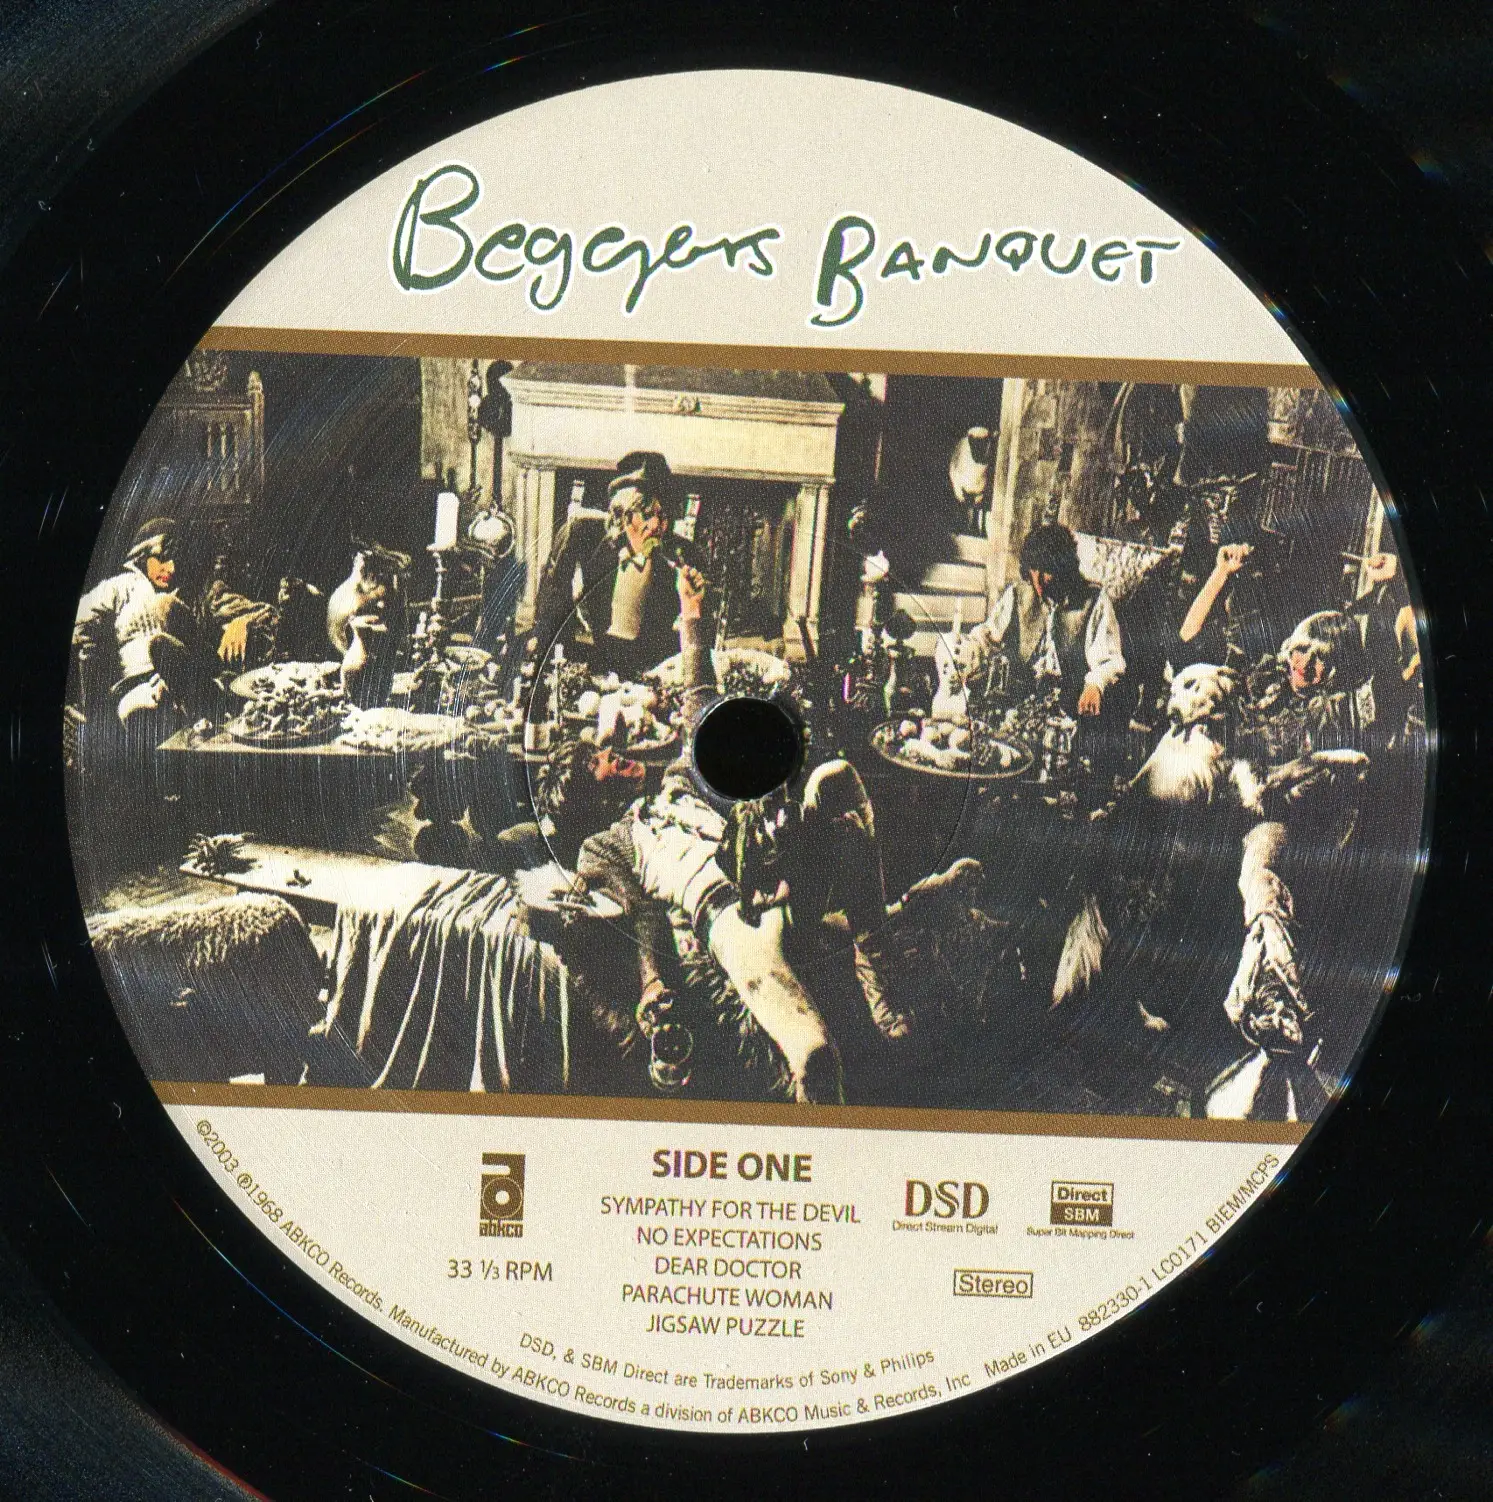 Rolling stones sympathy for the devil. The Rolling Stones Beggars Banquet 1968.